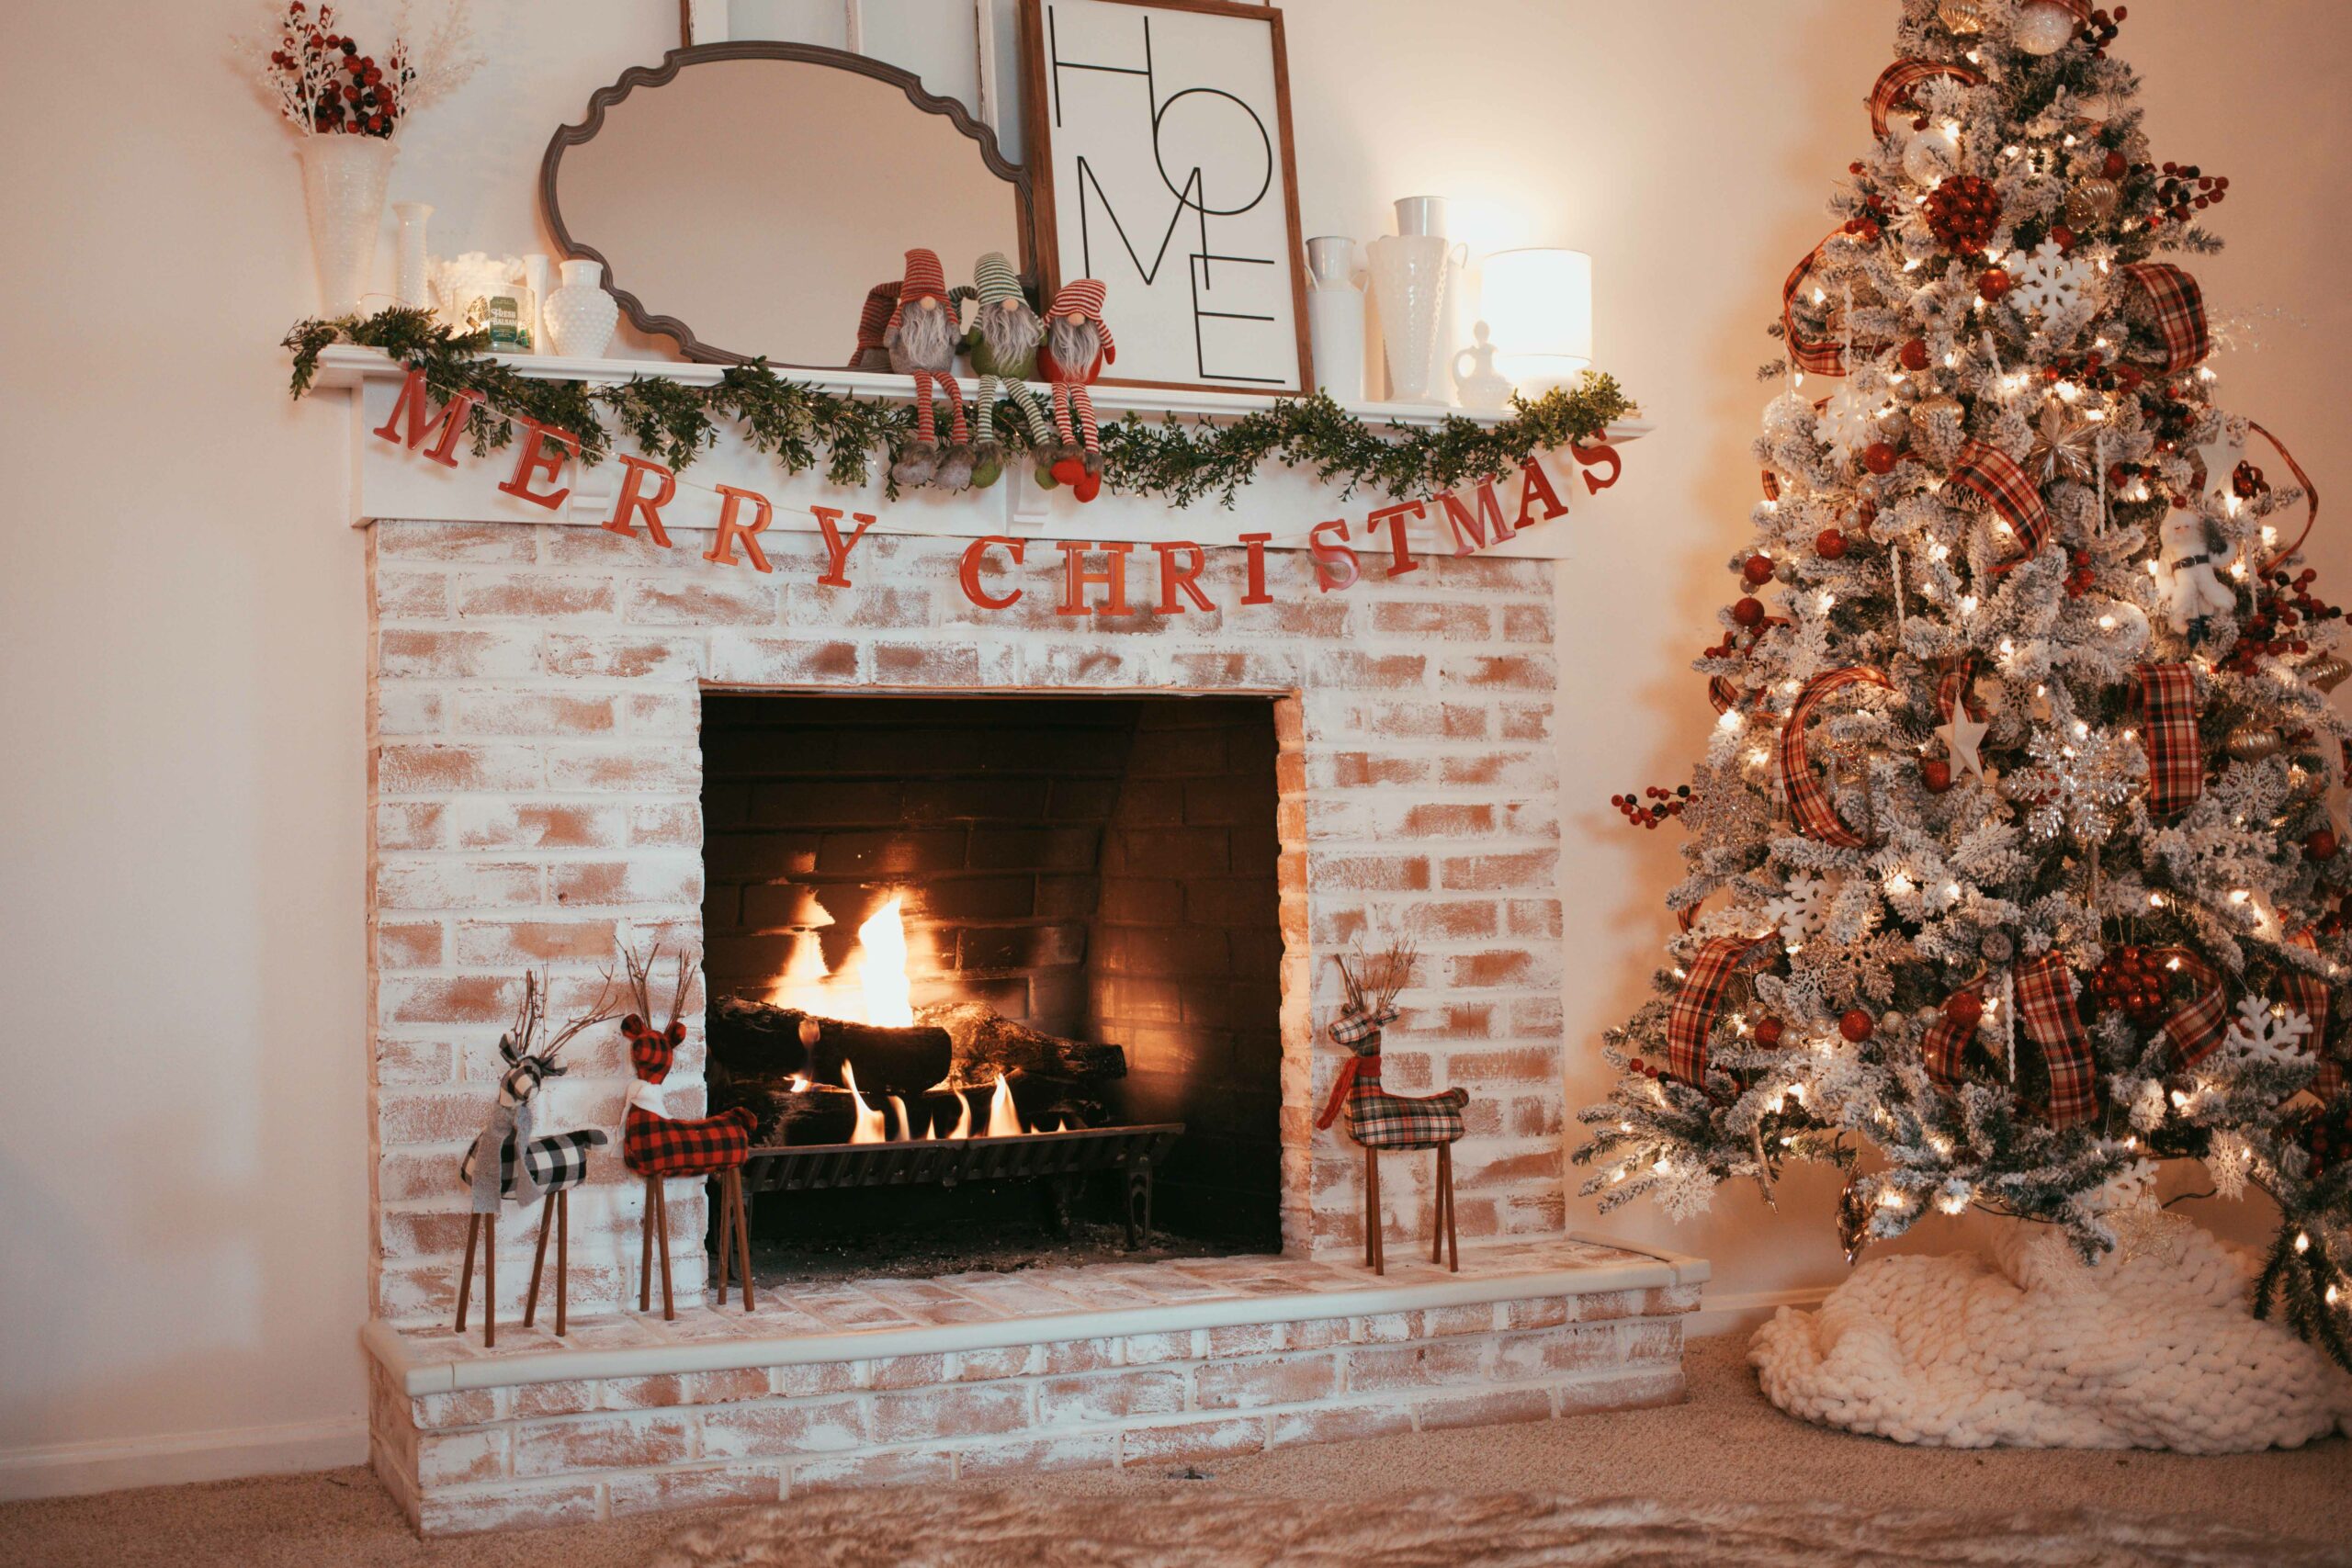 How to Decorate Your Christmas Tree Under $150 angela lanter hello gorgeous